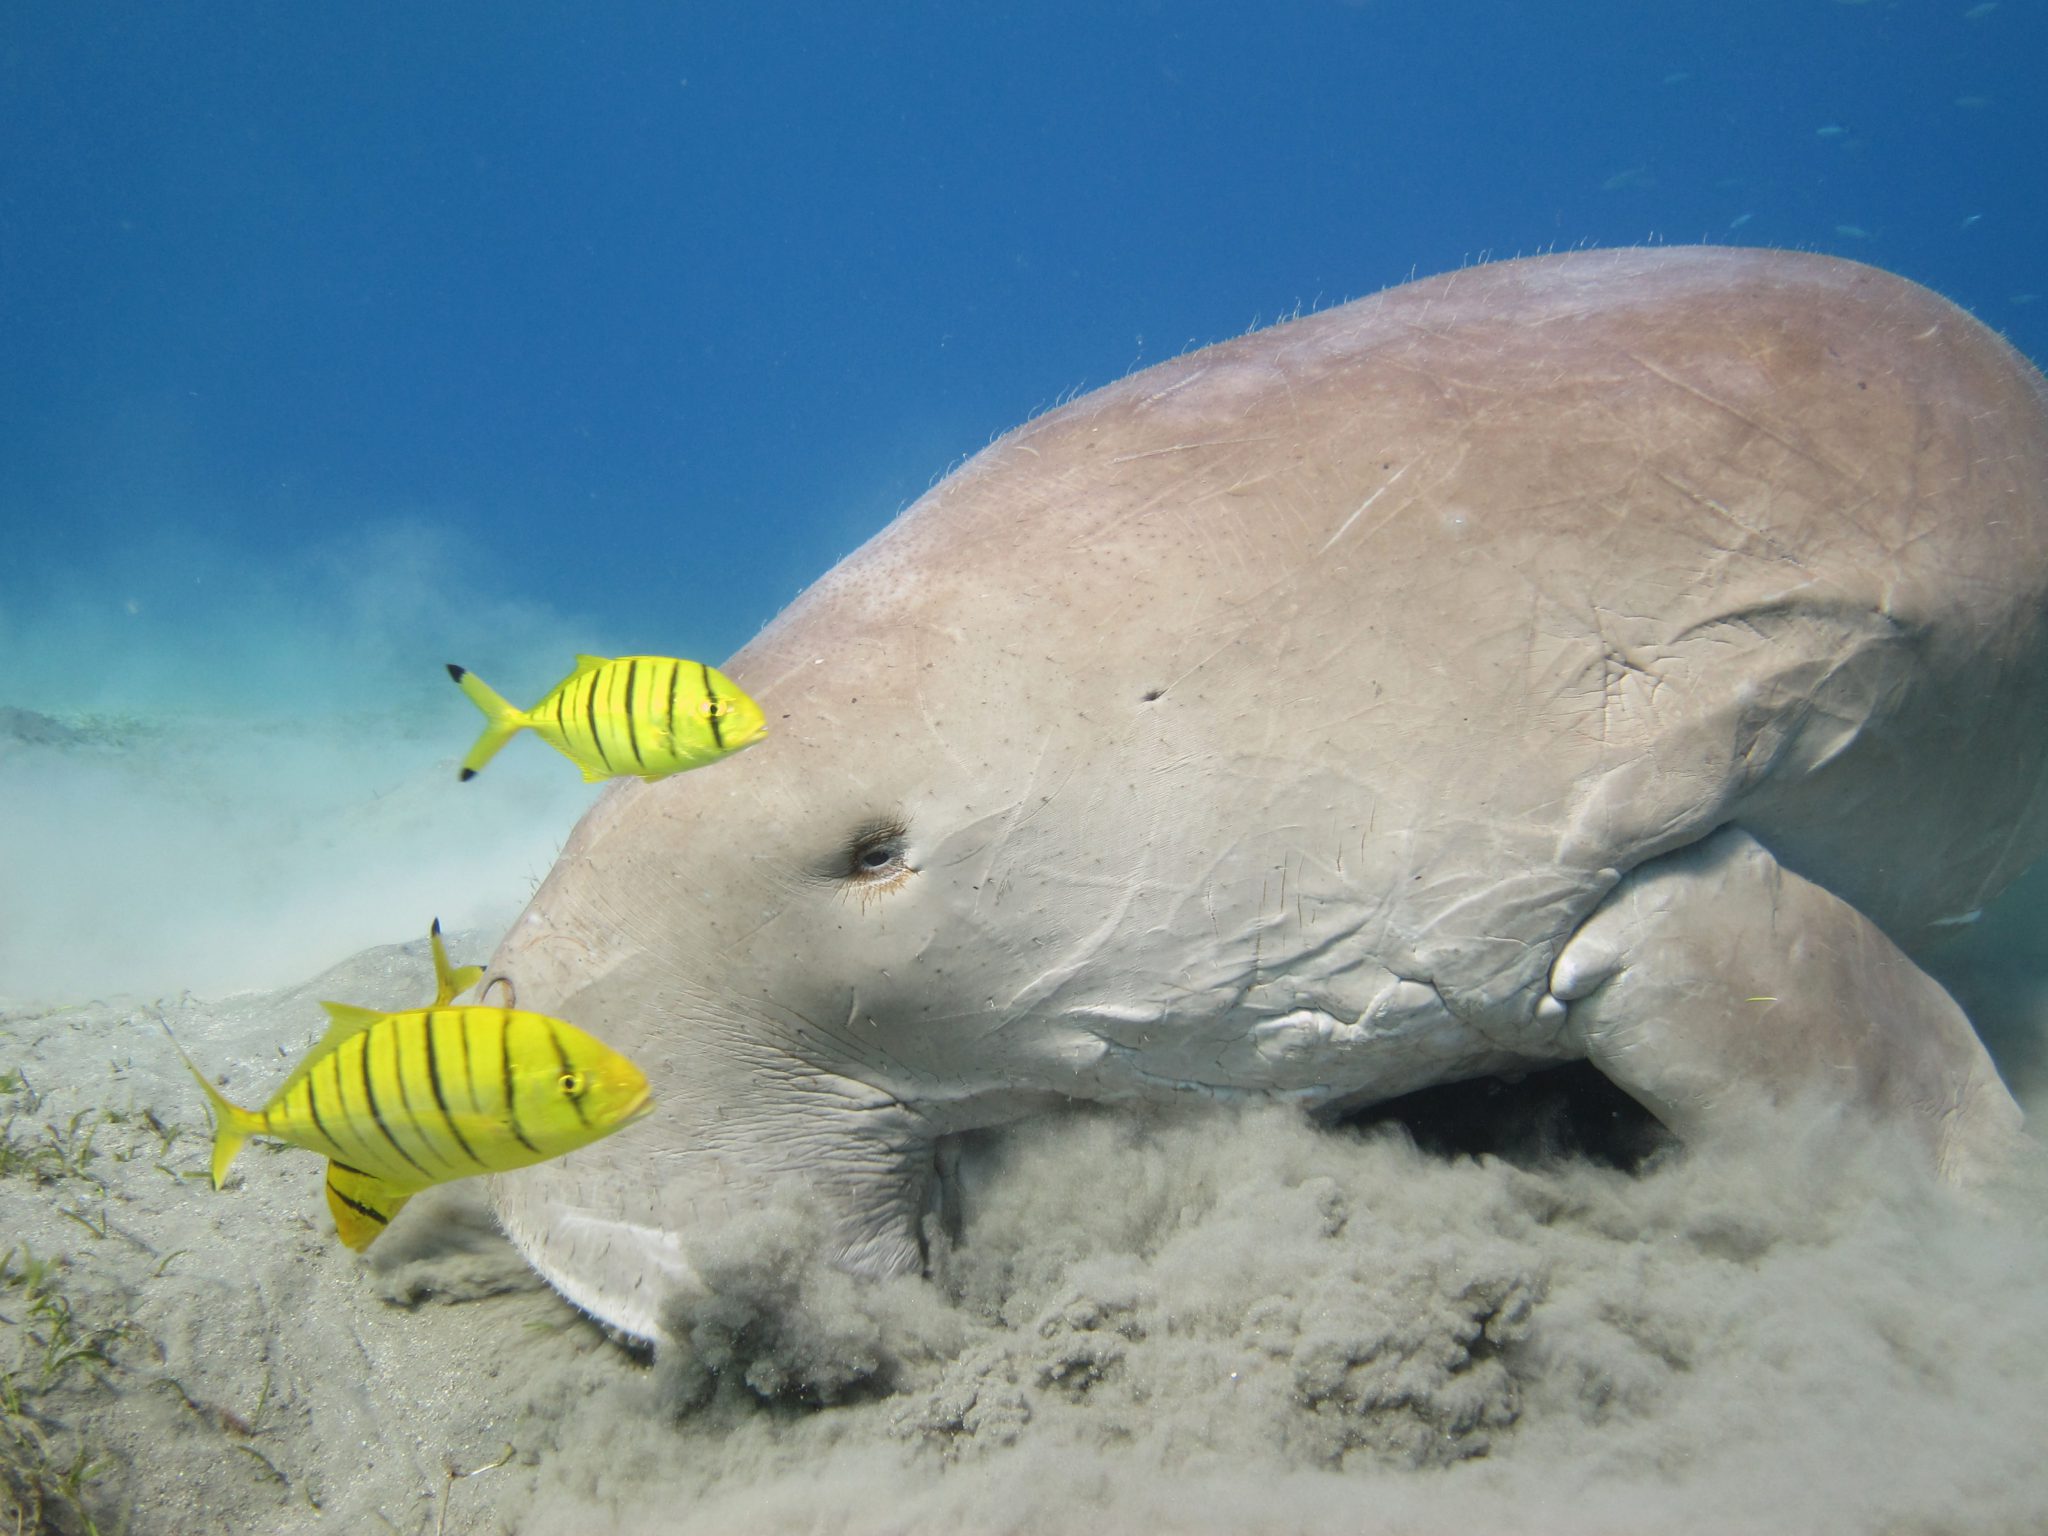 A dugong foraging in the seagrass at Marsa Alam, one of the best shore diving destinations to see these rare creatures